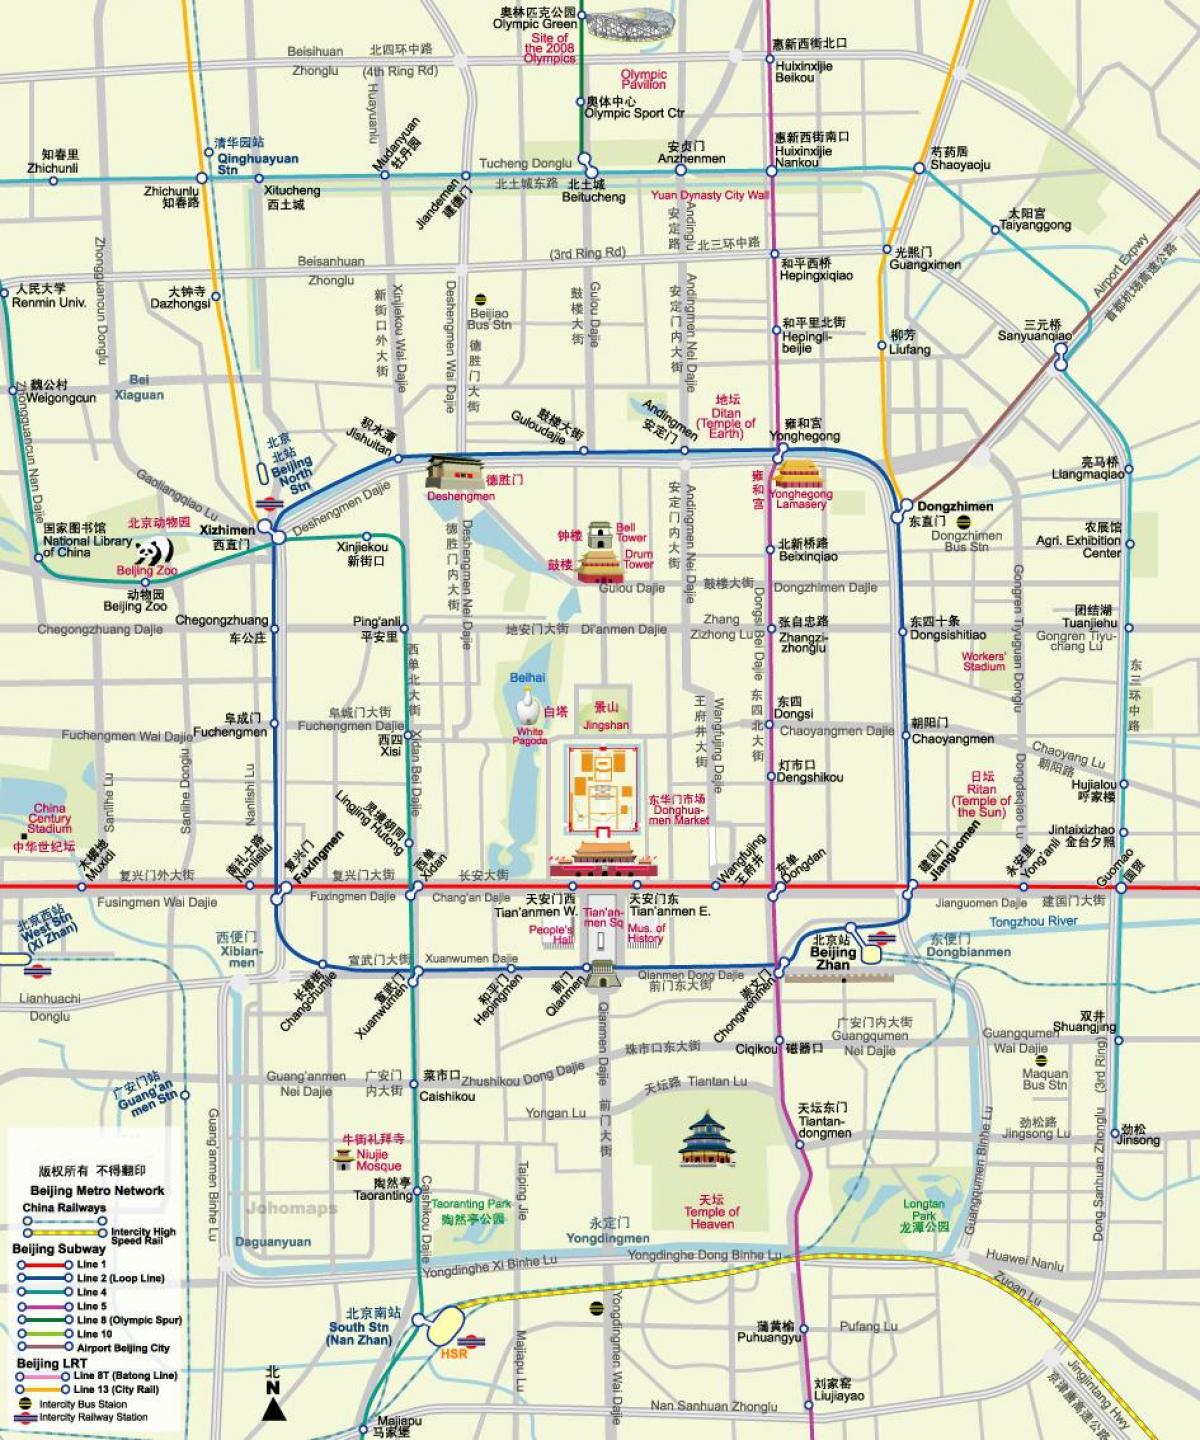 map of Beijing subway map with tourist attractions